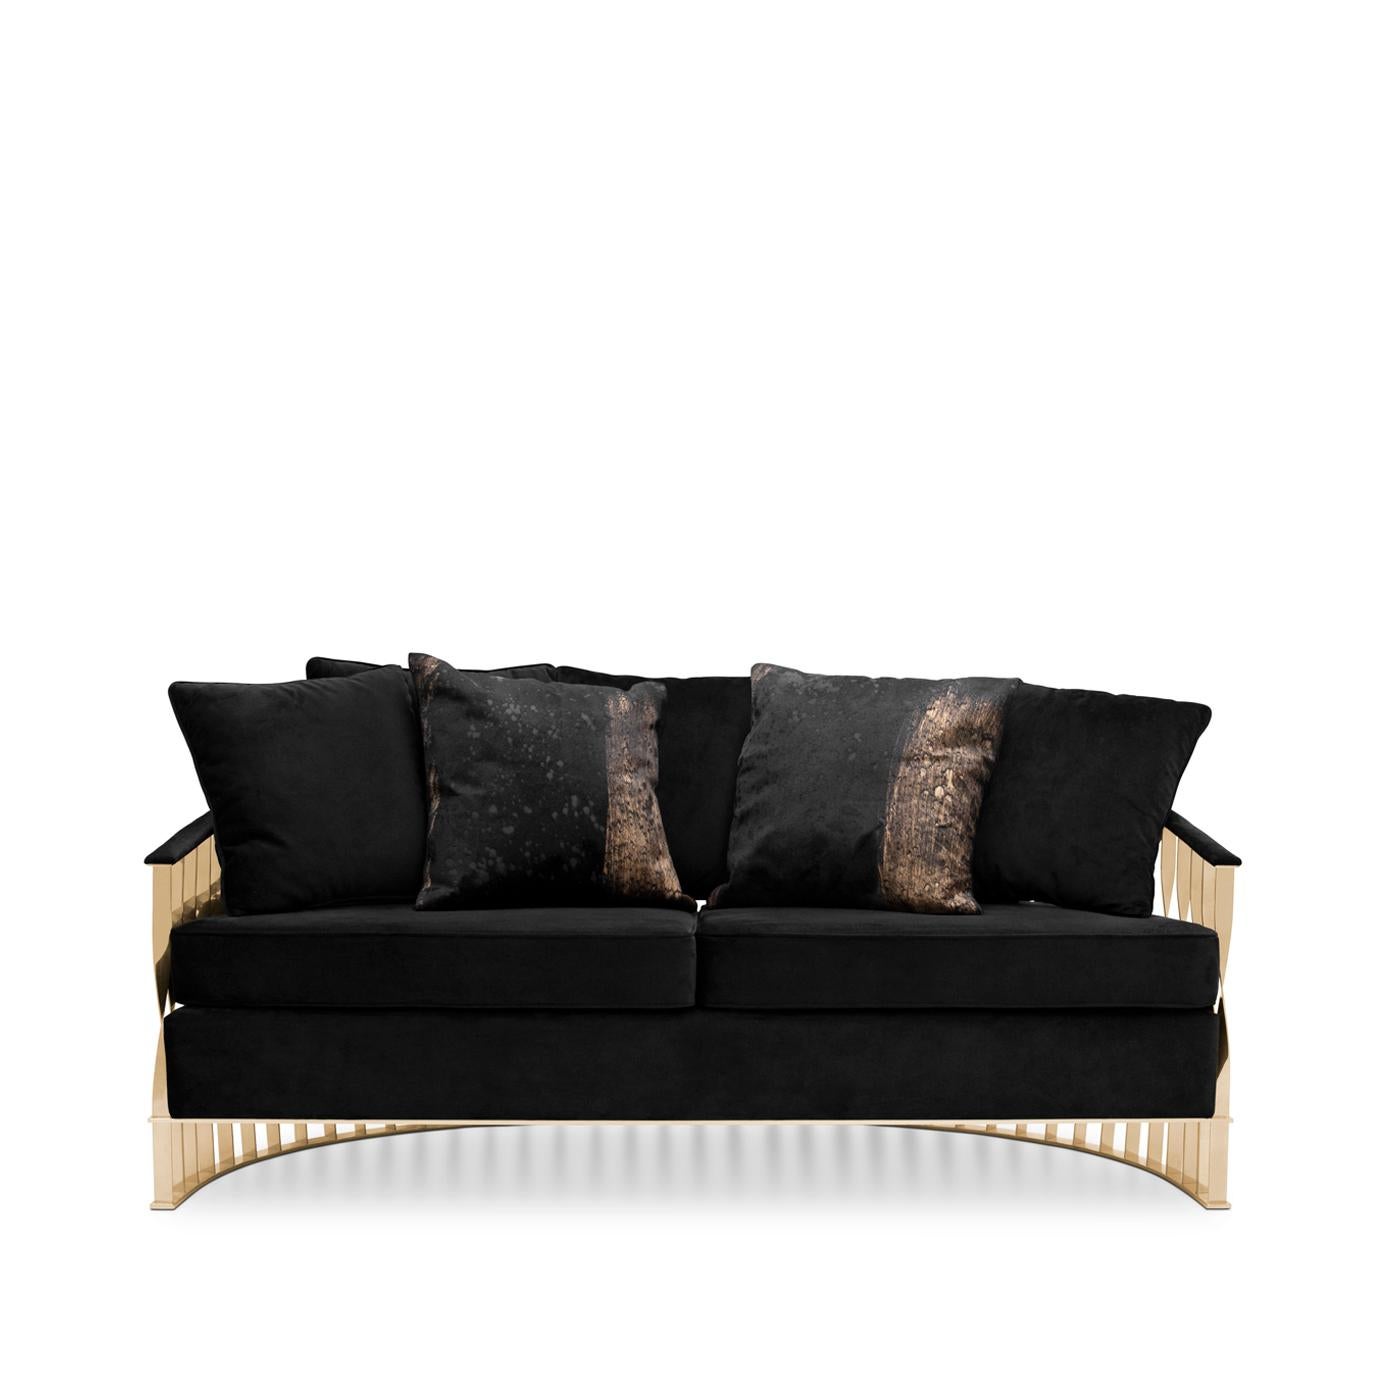 This fluid and unusual sofa transcend design and jewelry. Conceived from a cuff bracelet, the Mandy sofa will embellish any setting with its supple upholstery and a base in twisted high-gloss metal.